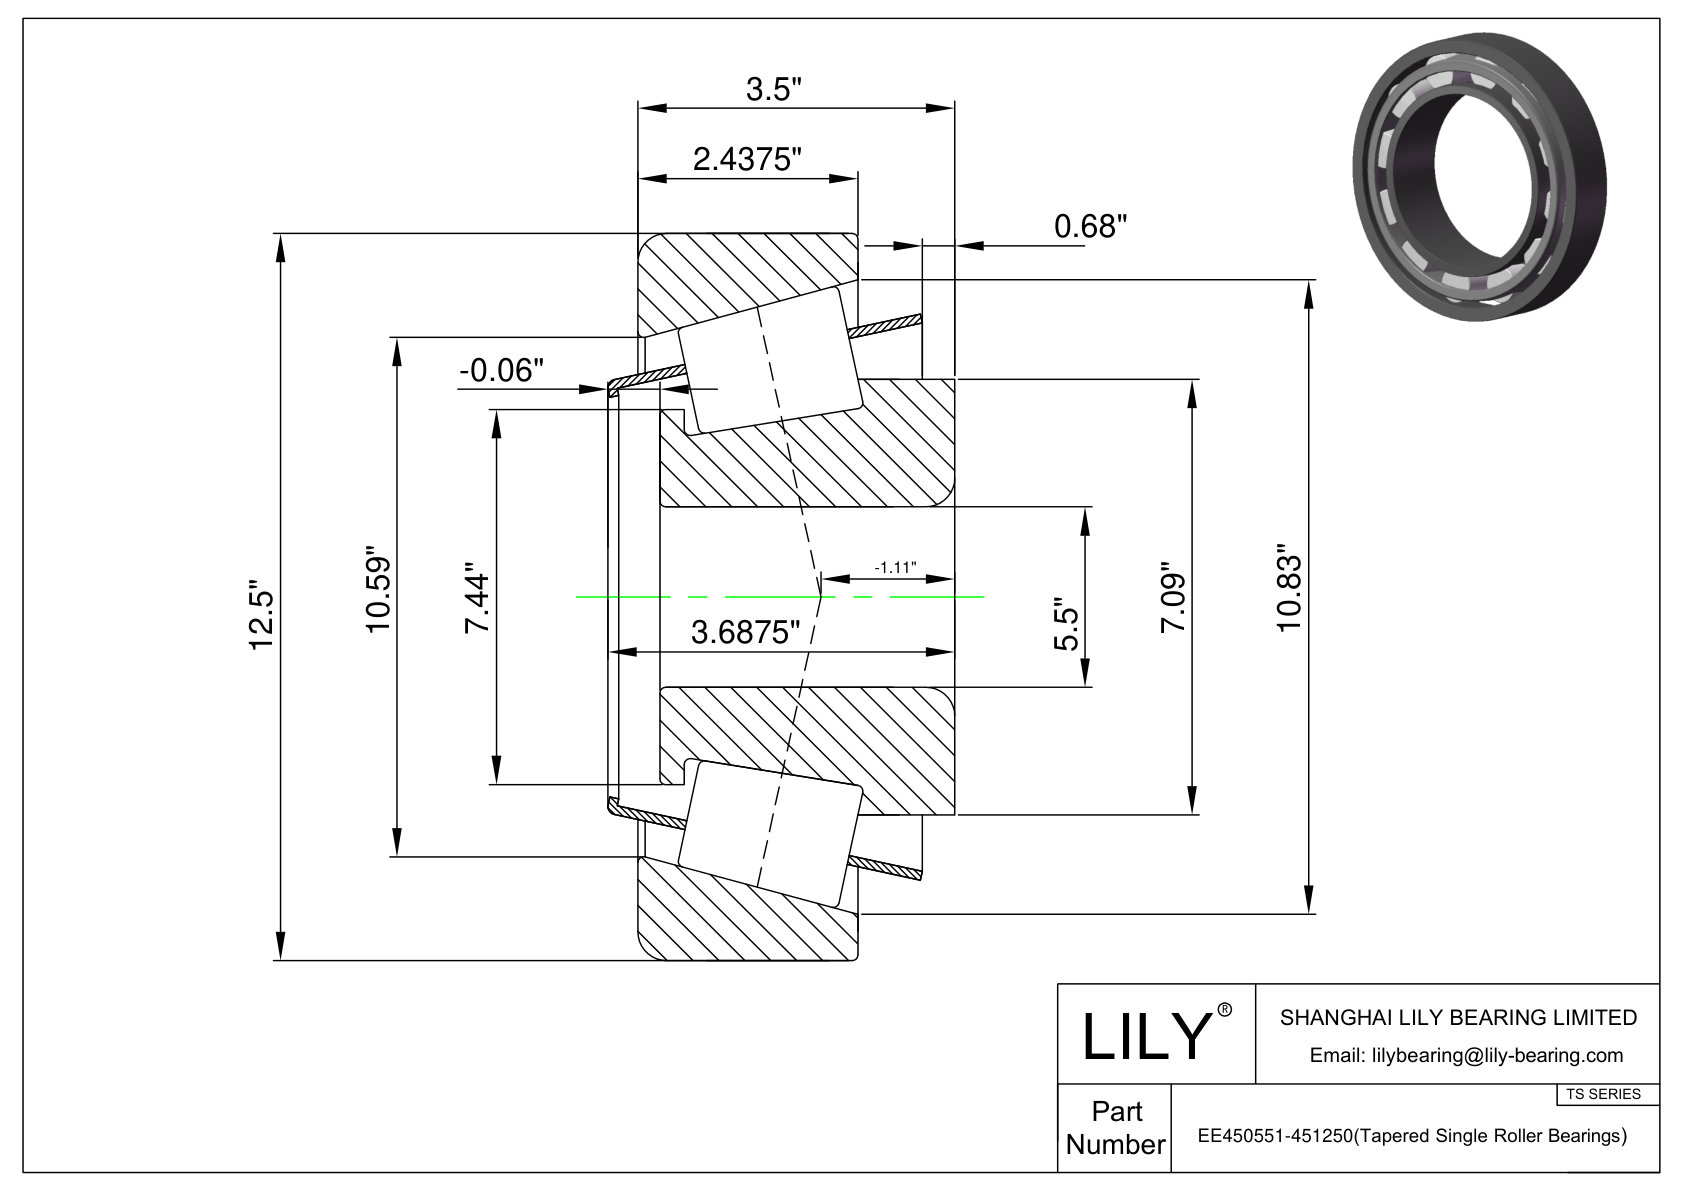 EE450551-451250 TS (Tapered Single Roller Bearings) (Imperial) cad drawing